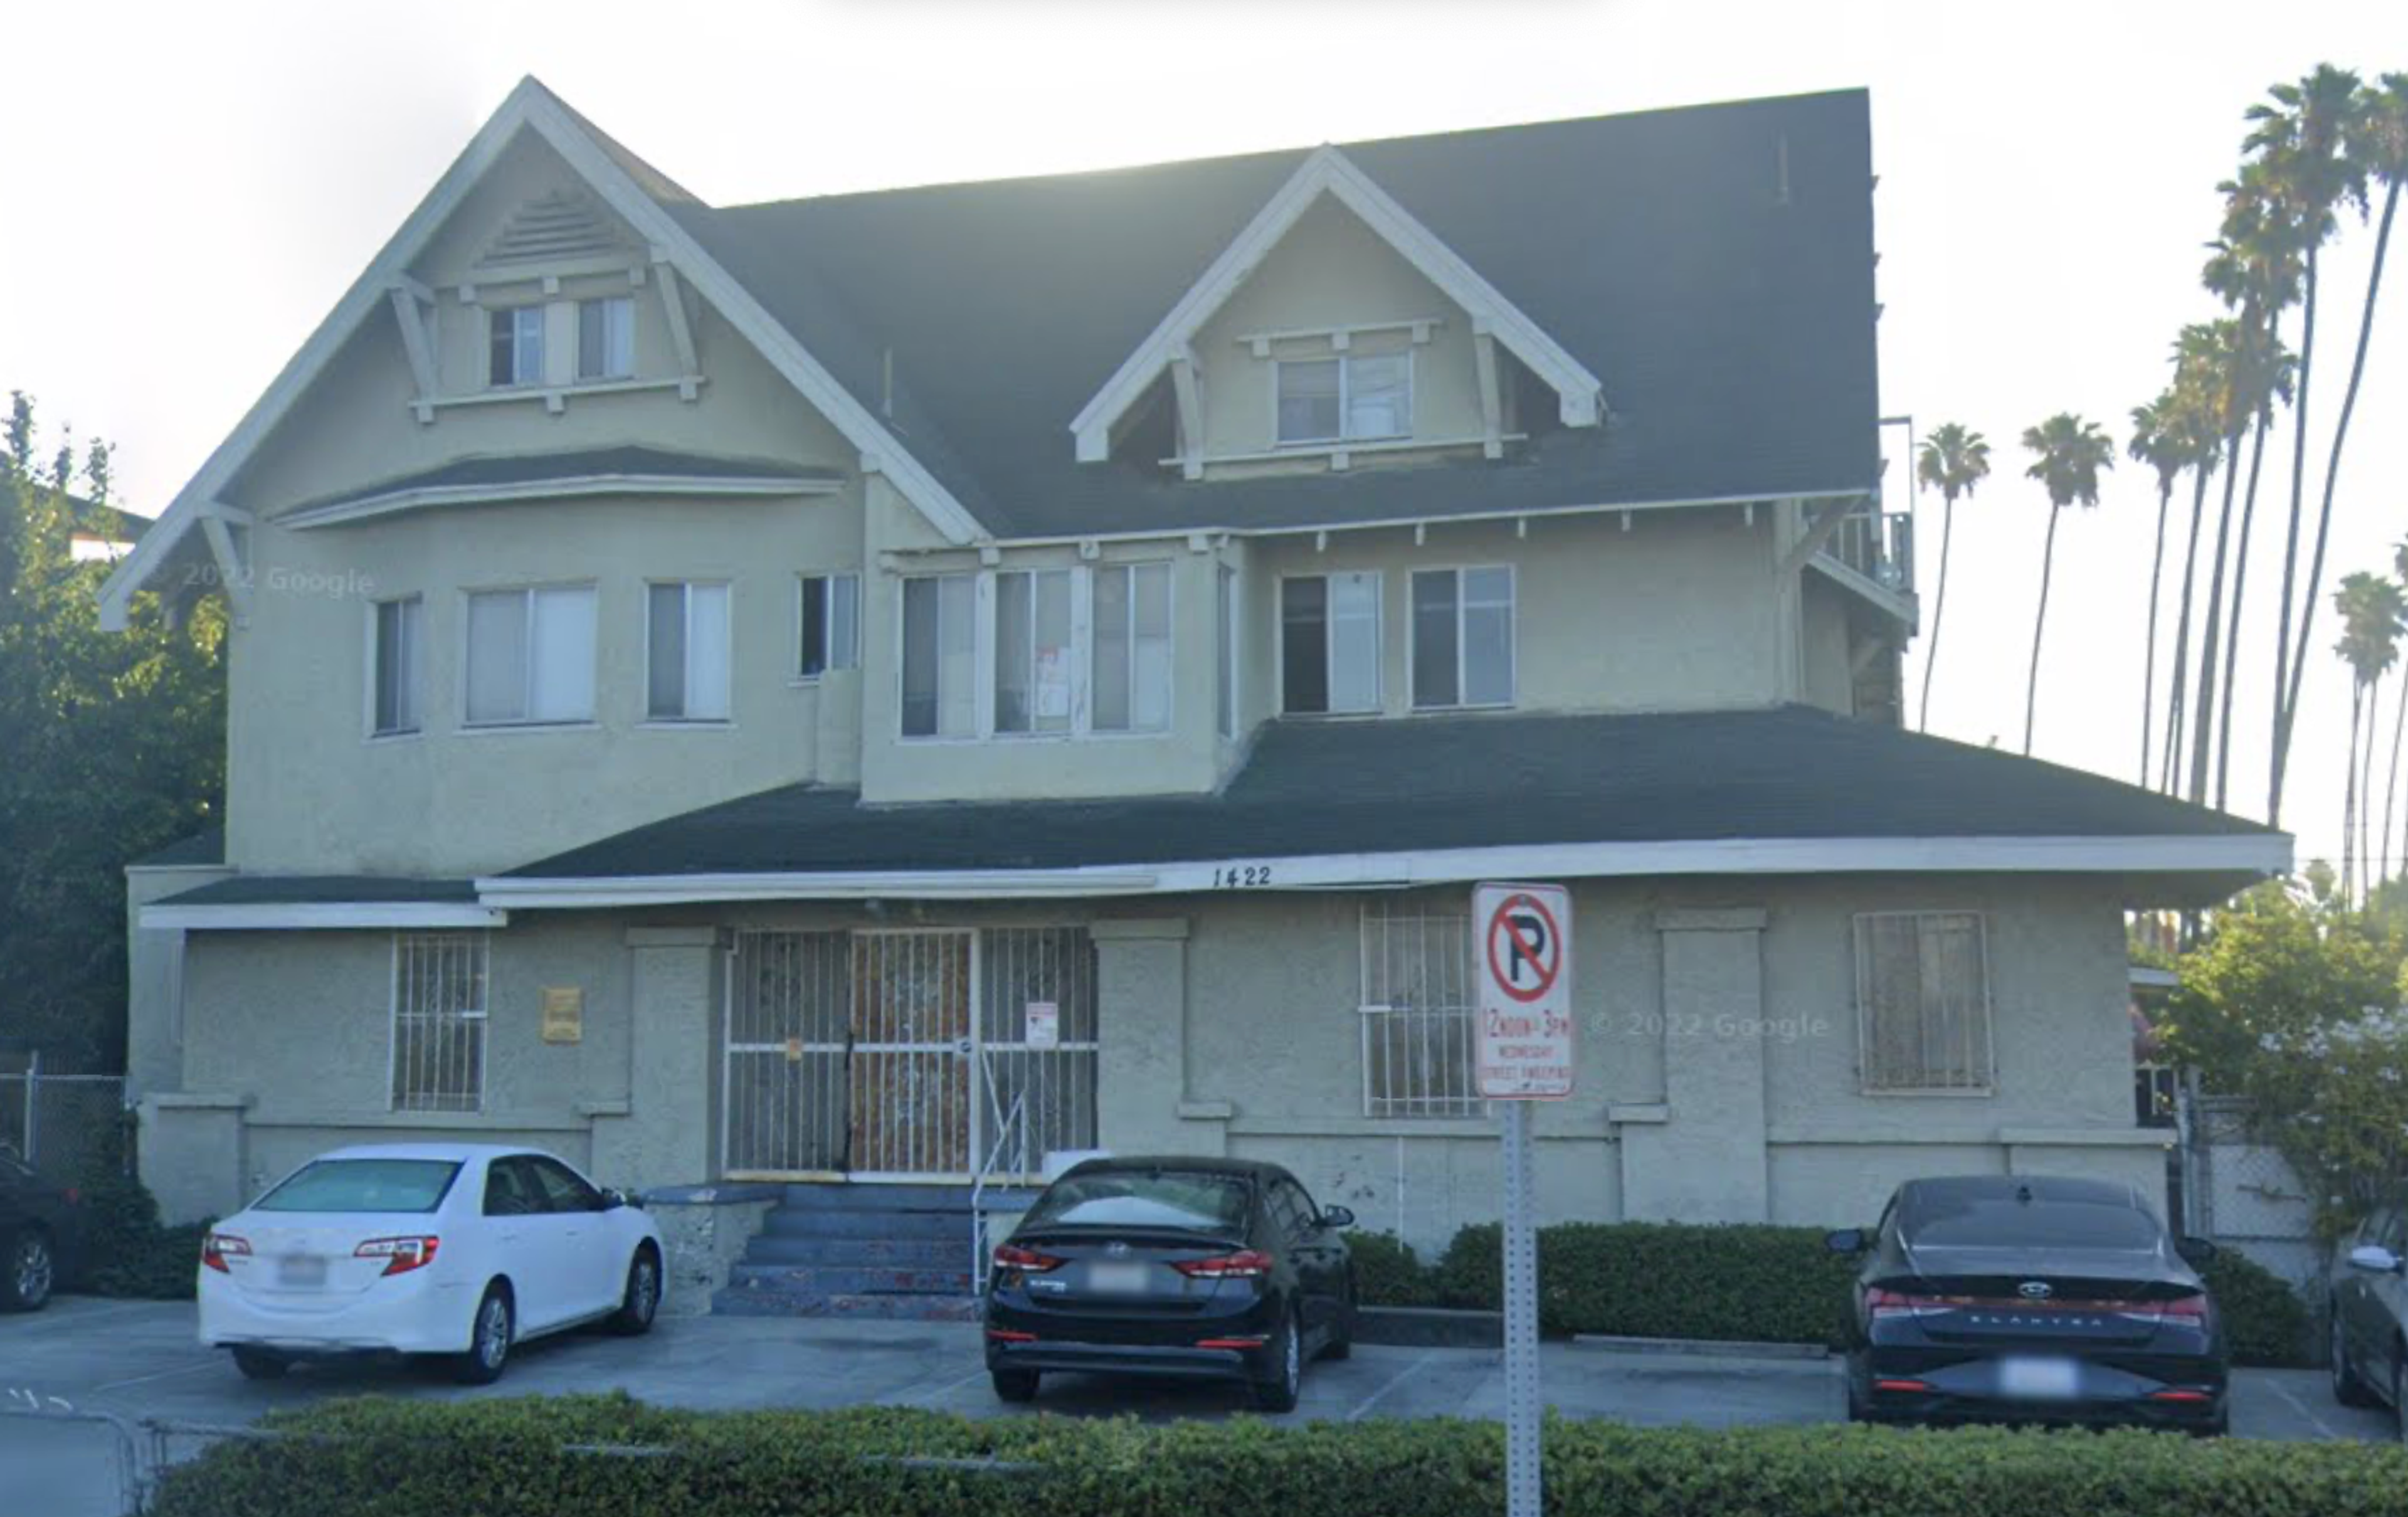 Street view capture of 1422 S. St. Andrews Place, a yellow/beige three-story Craftsman multifamily home with a gray roof.